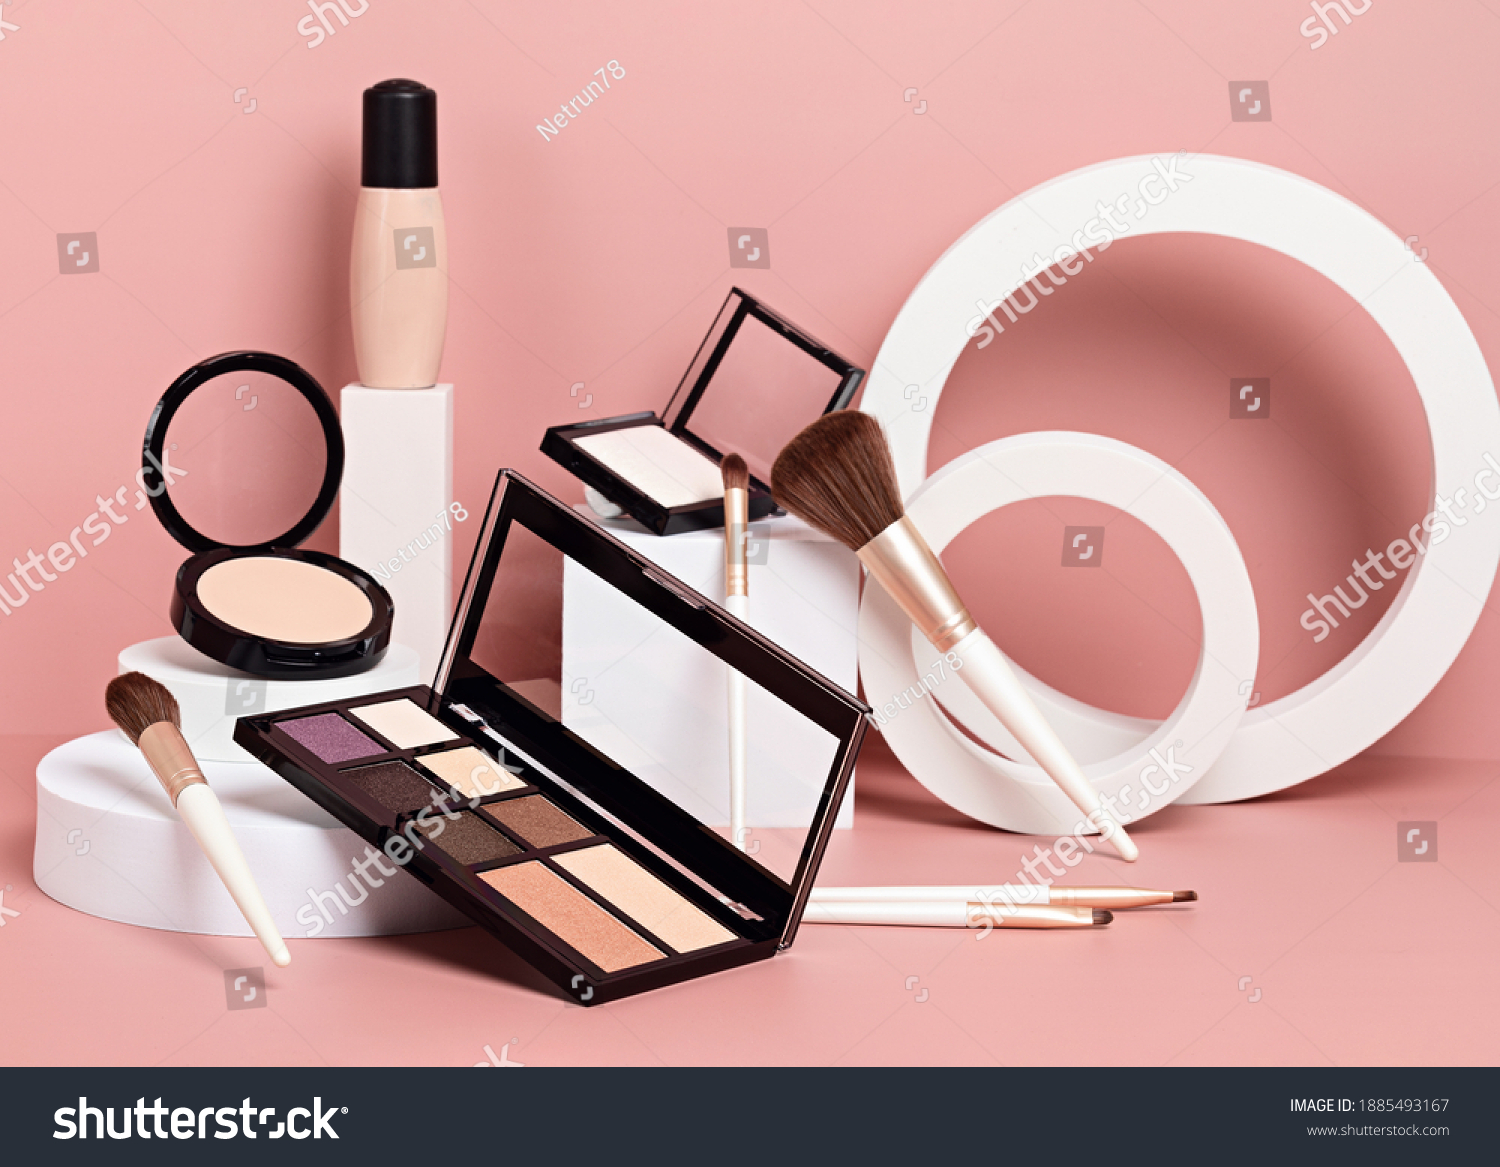 Make up products prsented on white podiums on pink pastel background. Mockup for branding and packaging presentation #1885493167